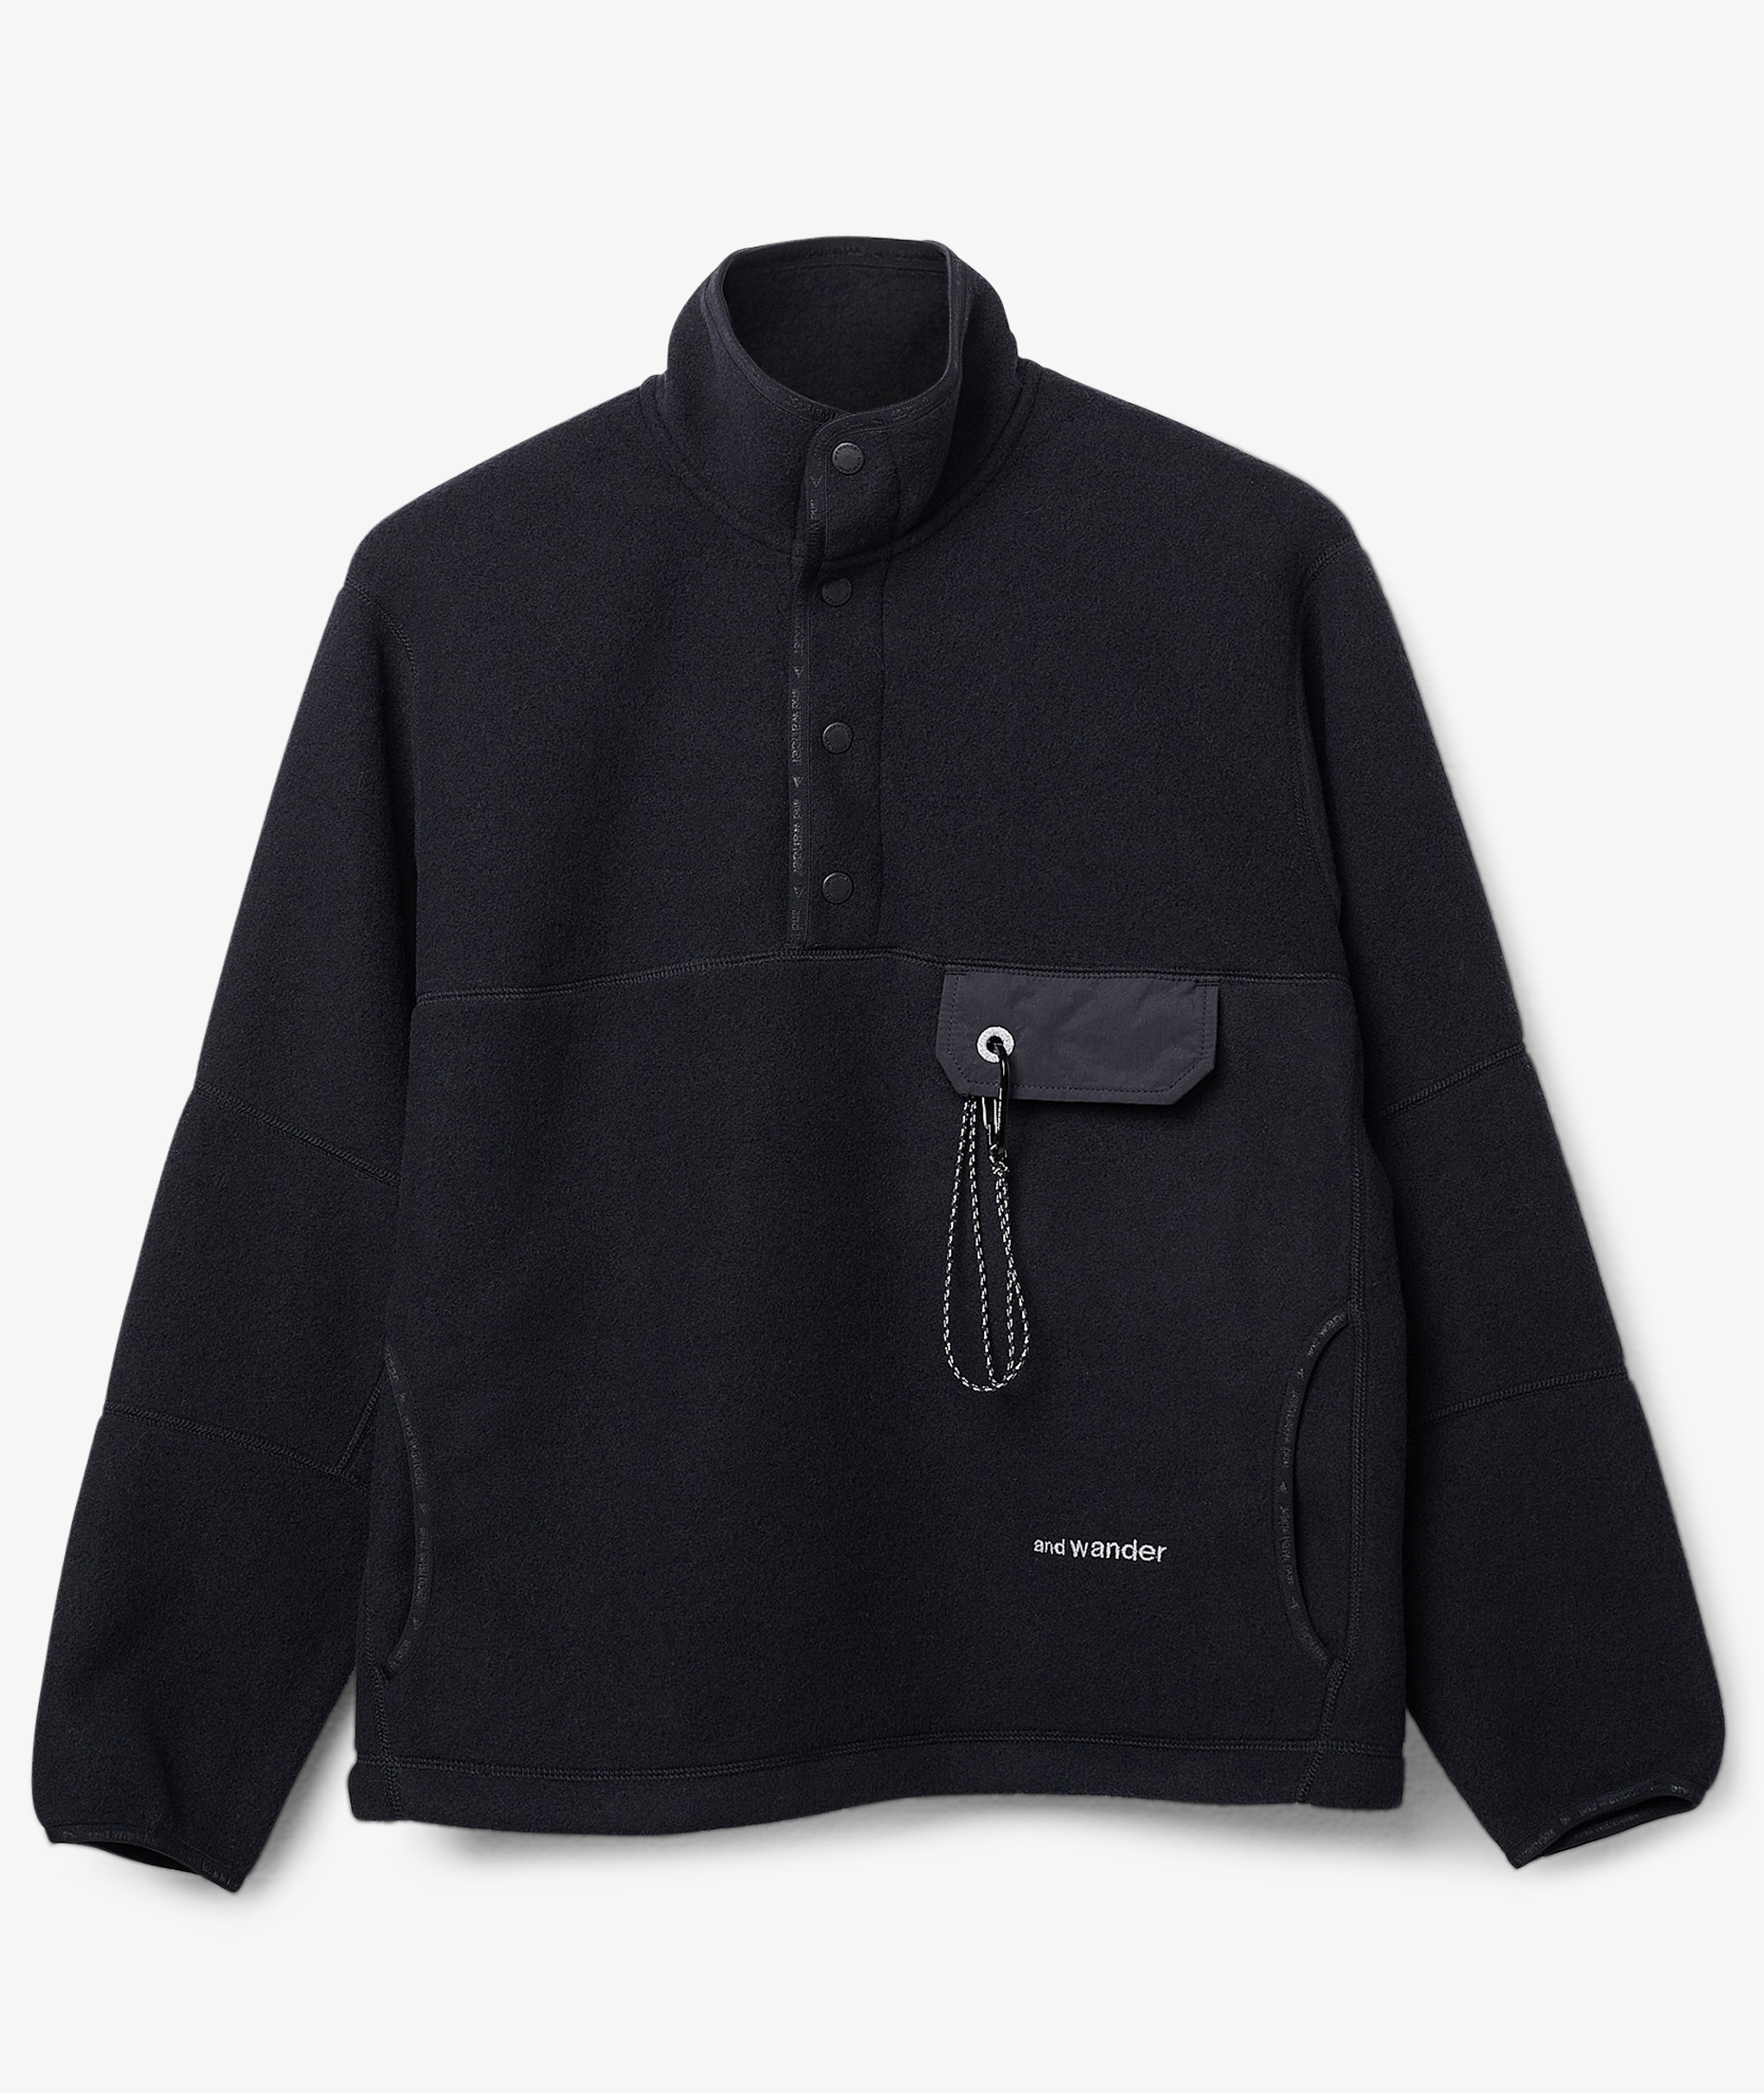 Norse Store | Shipping Worldwide - And Wander Wool Fleece Pullover - Black